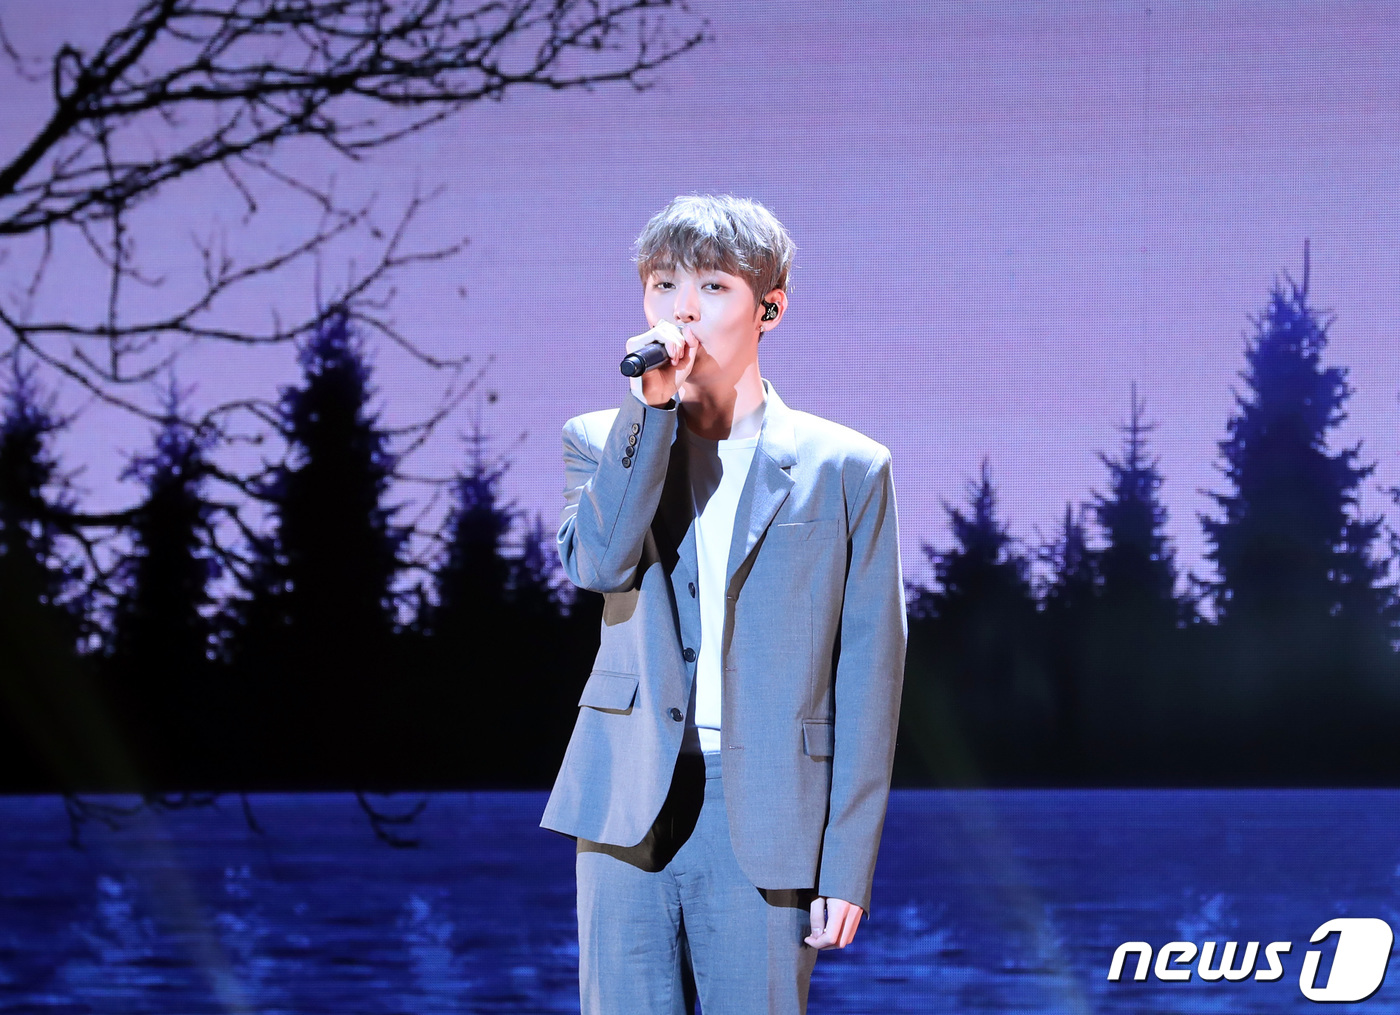 Singer Yoon Ji-sung proudly debuts solo after Wanna One activityYoon Ji-sung is the first member of Wanna One to release a solo album in earnest.Yoon Ji-sung opened a showcase for his first solo album Aside at Blue Square in Hannam-dong, Seoul, at 4 p.m. on the 20th.Im really nervous, Im so excited, Ive prepared a lot, Ive prepared a lot, but Im worried too, said Yoon Ji-sung.Yoon Ji-sung said, Lee Dae-hwi participated in the song comma and said, It is a song written by our youngest Dae-hui, and I am attached because I wrote it myself. This morning, I called Daehwi. He said, Chimpe is good.I want to hear the modifier of emotion if it is intellectual, and I want to let you know that there is a variety of charm through this solo album, said Yoon Ji-sung.When I was in Wanna One, I felt like I was in the concept, but this time I was all concerned because I had to show people to me, said Yoon Ji-sung.I think its different to draw a song that I have a voice because I do what 11 people do alone, he added.I feel a lot of vacancies, but I think I can show various charms in the form of Yoon Ji-sung, he added.Yoon Ji-sung is planning to join the military this year, so he said, Im well prepared for solo albums and musicals Days of the Day together.Now, if you say that you are not sorry for Yi Gi, you are lying. But I want to show you a lot before joining the army. I am trying hard to pay back because of the person who is on stage by the fans, he added.The solo album Aside is an abbreviation for Always on your side, meaning always there are four with the motif of Bangbaek (), an ambassador in the play.I was a group Wanna One and always gave a heartfelt gratitude to the fans who believed and supported me.The title song In the Rain is a pop ballad genre with an emotional melody and an orchestral melody. It is an emotional farewell song with a sincere heart that welcomes a farewell without preparation from a loved one.I like the original acoustic songs, all the songs are really attached, Yoon Ji-sung explained of the deep emotional songs that remain.